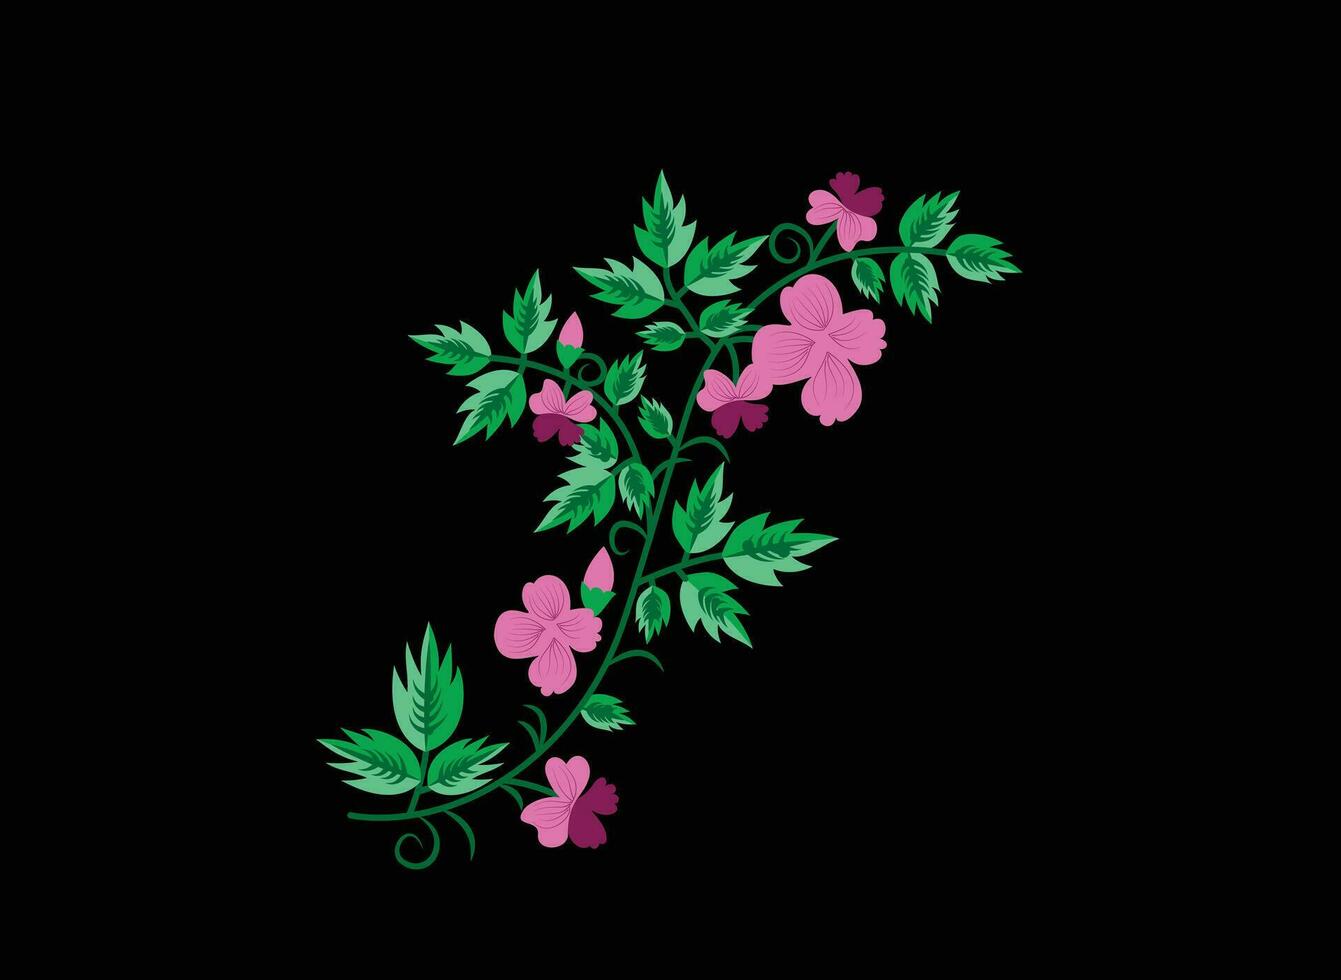 A flower and leaves on a black background vector